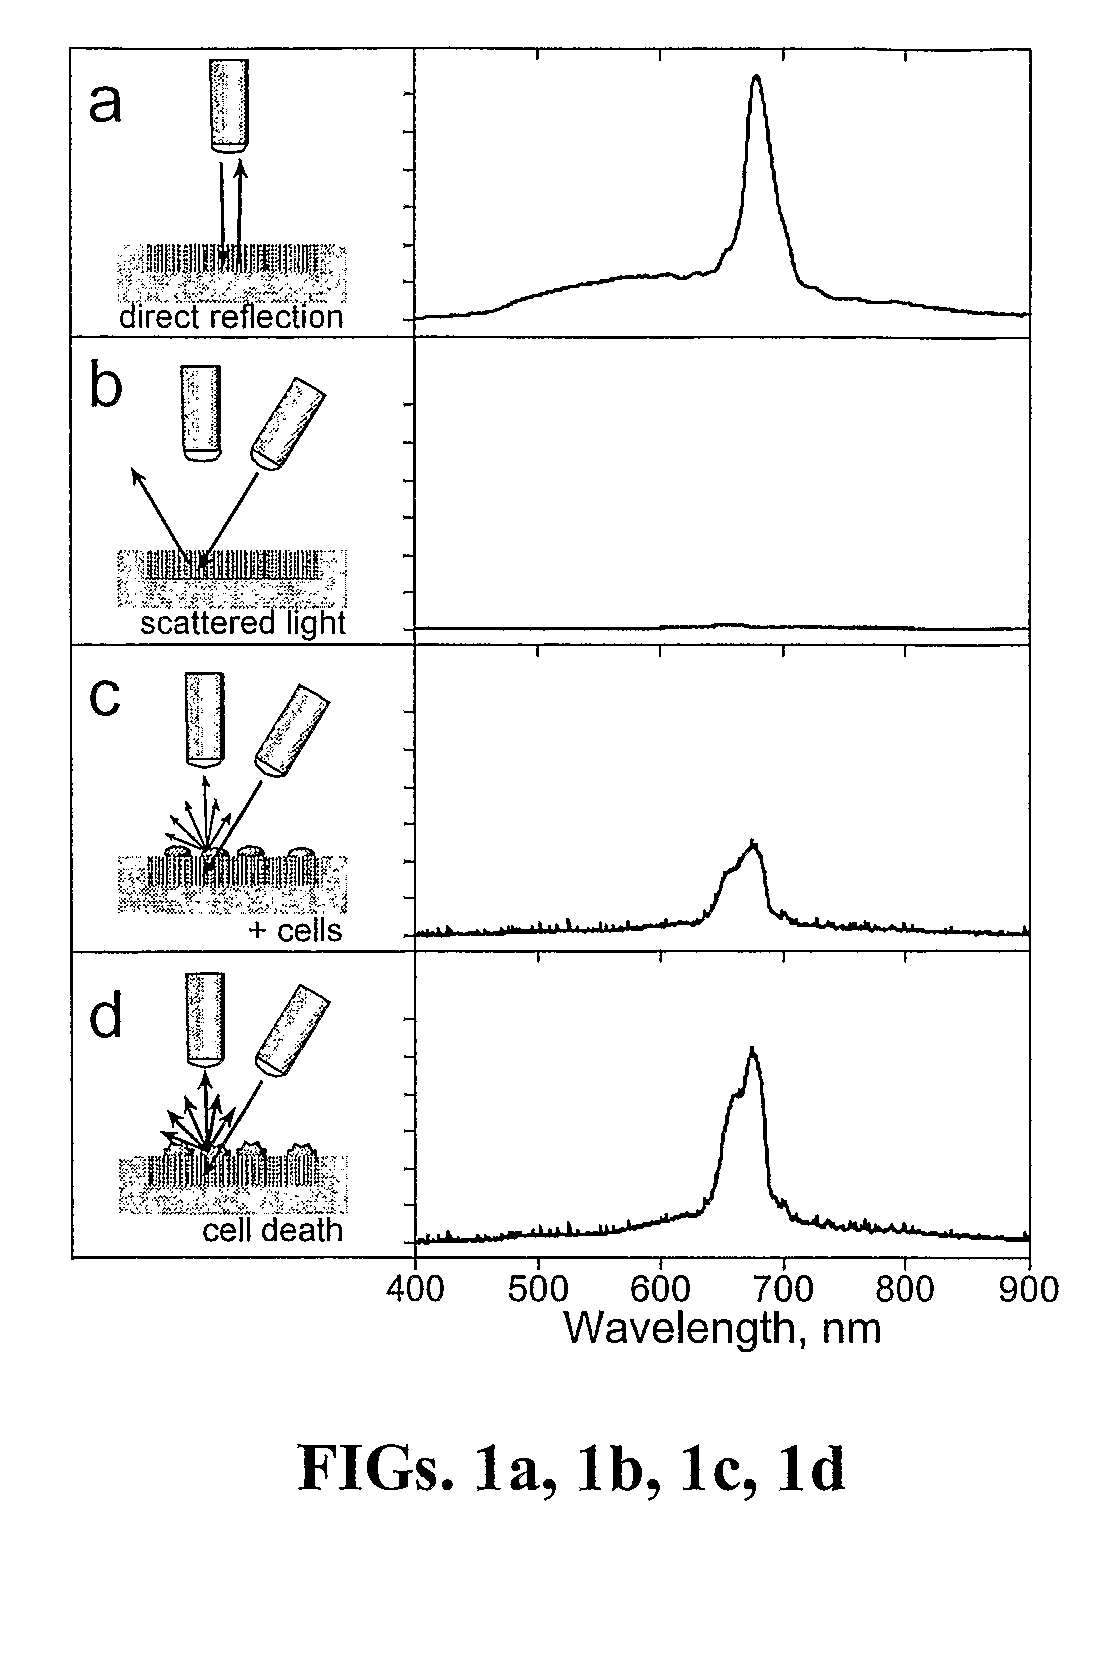 Porous Photonic Crystal with Light Scattering Domains and Methods of Synthesis and Use Thereof